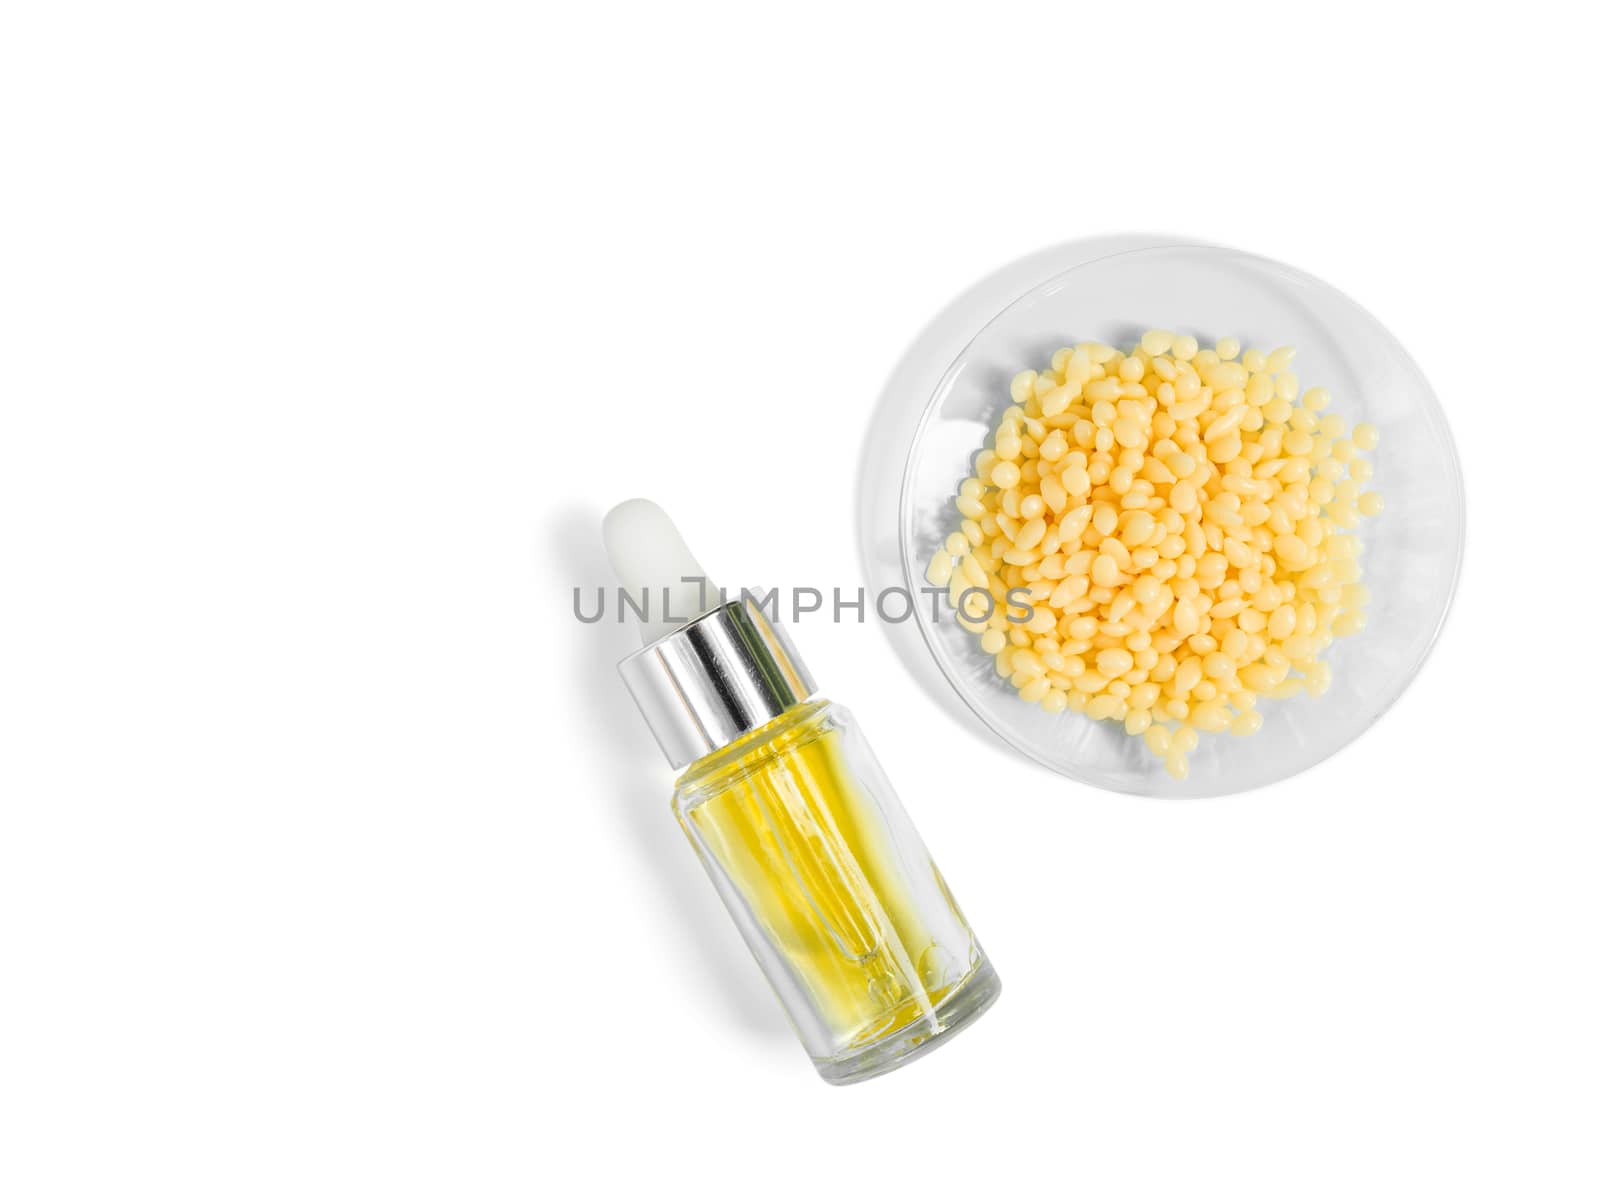 Chemicals for beauty care on a white background. (Top View) by chadchai_k